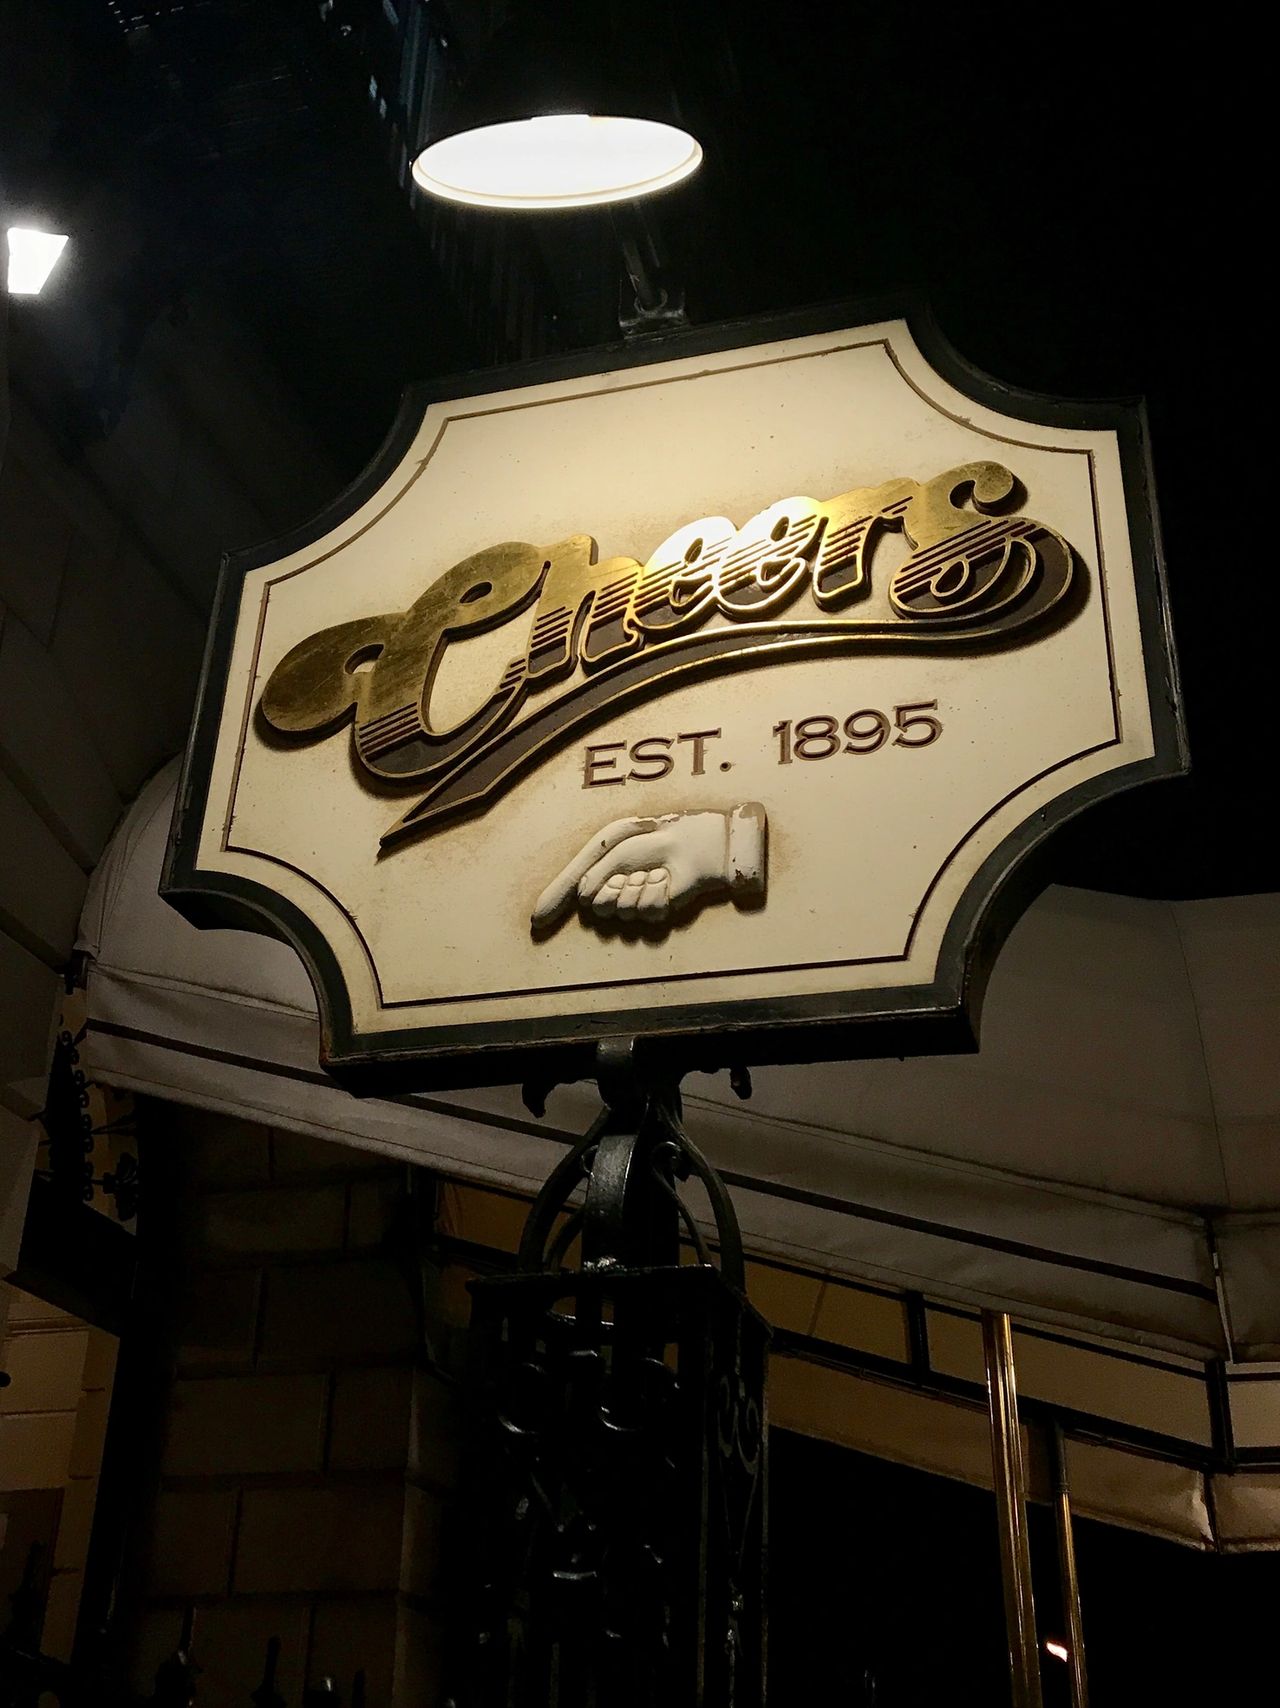 The famous Cheers sign